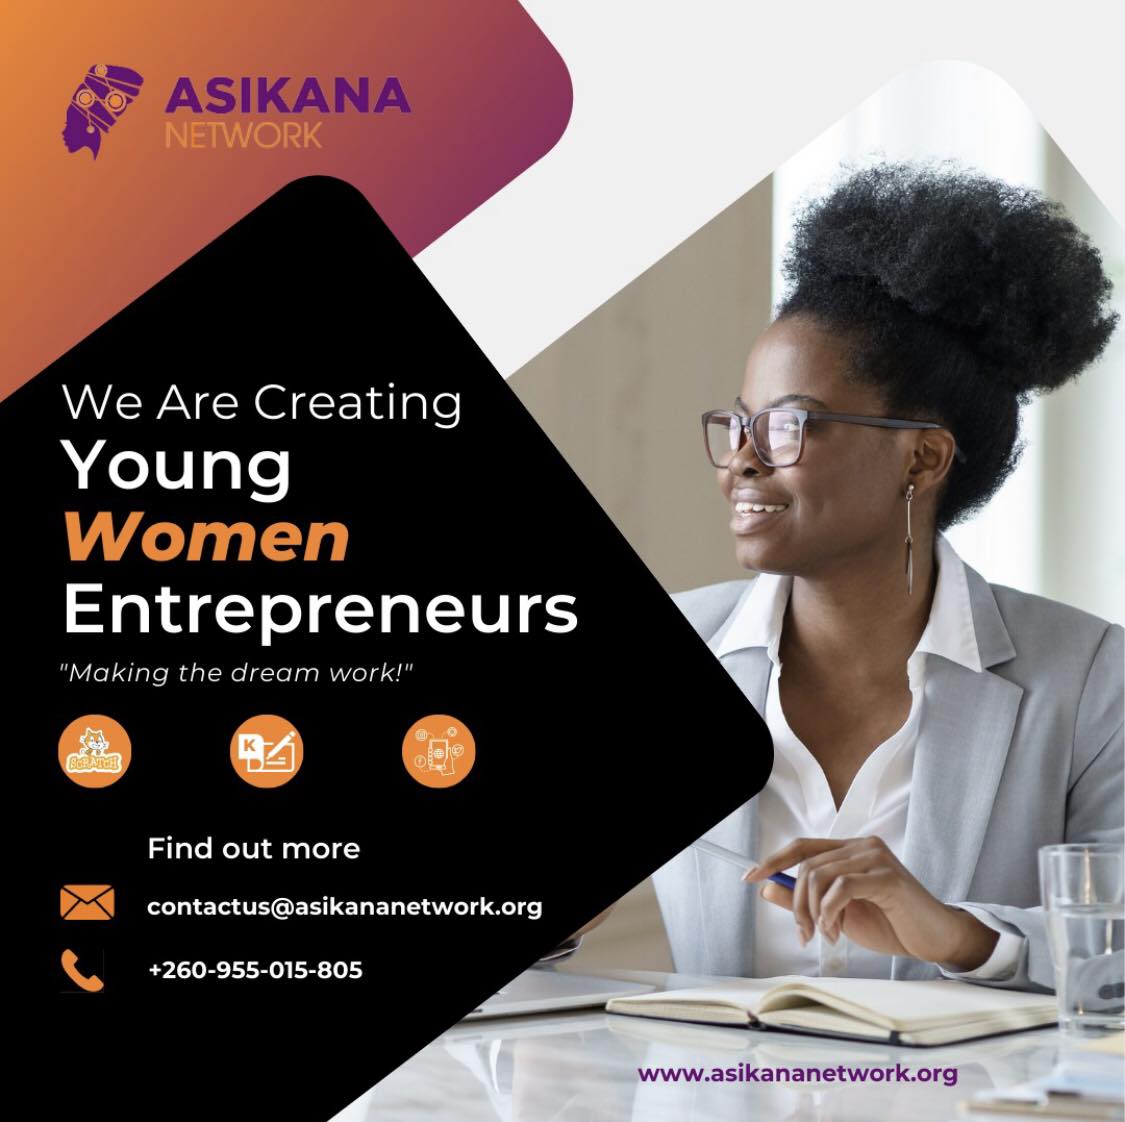 We are excited to be registering a new cohort for our women entrepreneur’s capacity building program. The program is a 4 week training completely free to women entrepreneurs. This is open to women in Lusaka. Sign up now. docs.google.com/forms/d/e/1FAI…